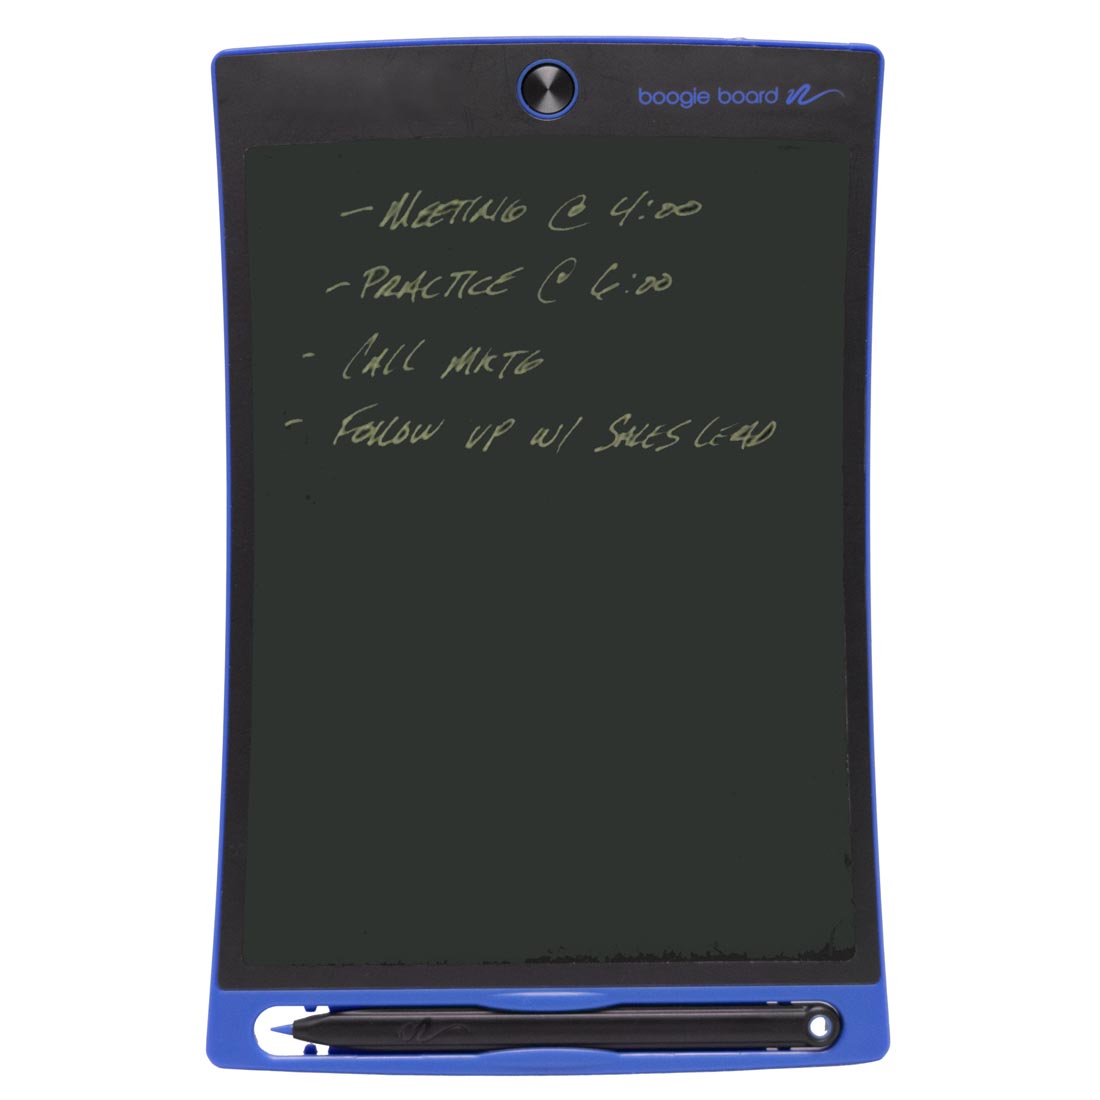 Blue Boogie Board Jot 8.5 LCD eWriter shown with a schedule checklist of Meeting, Practice, etc.